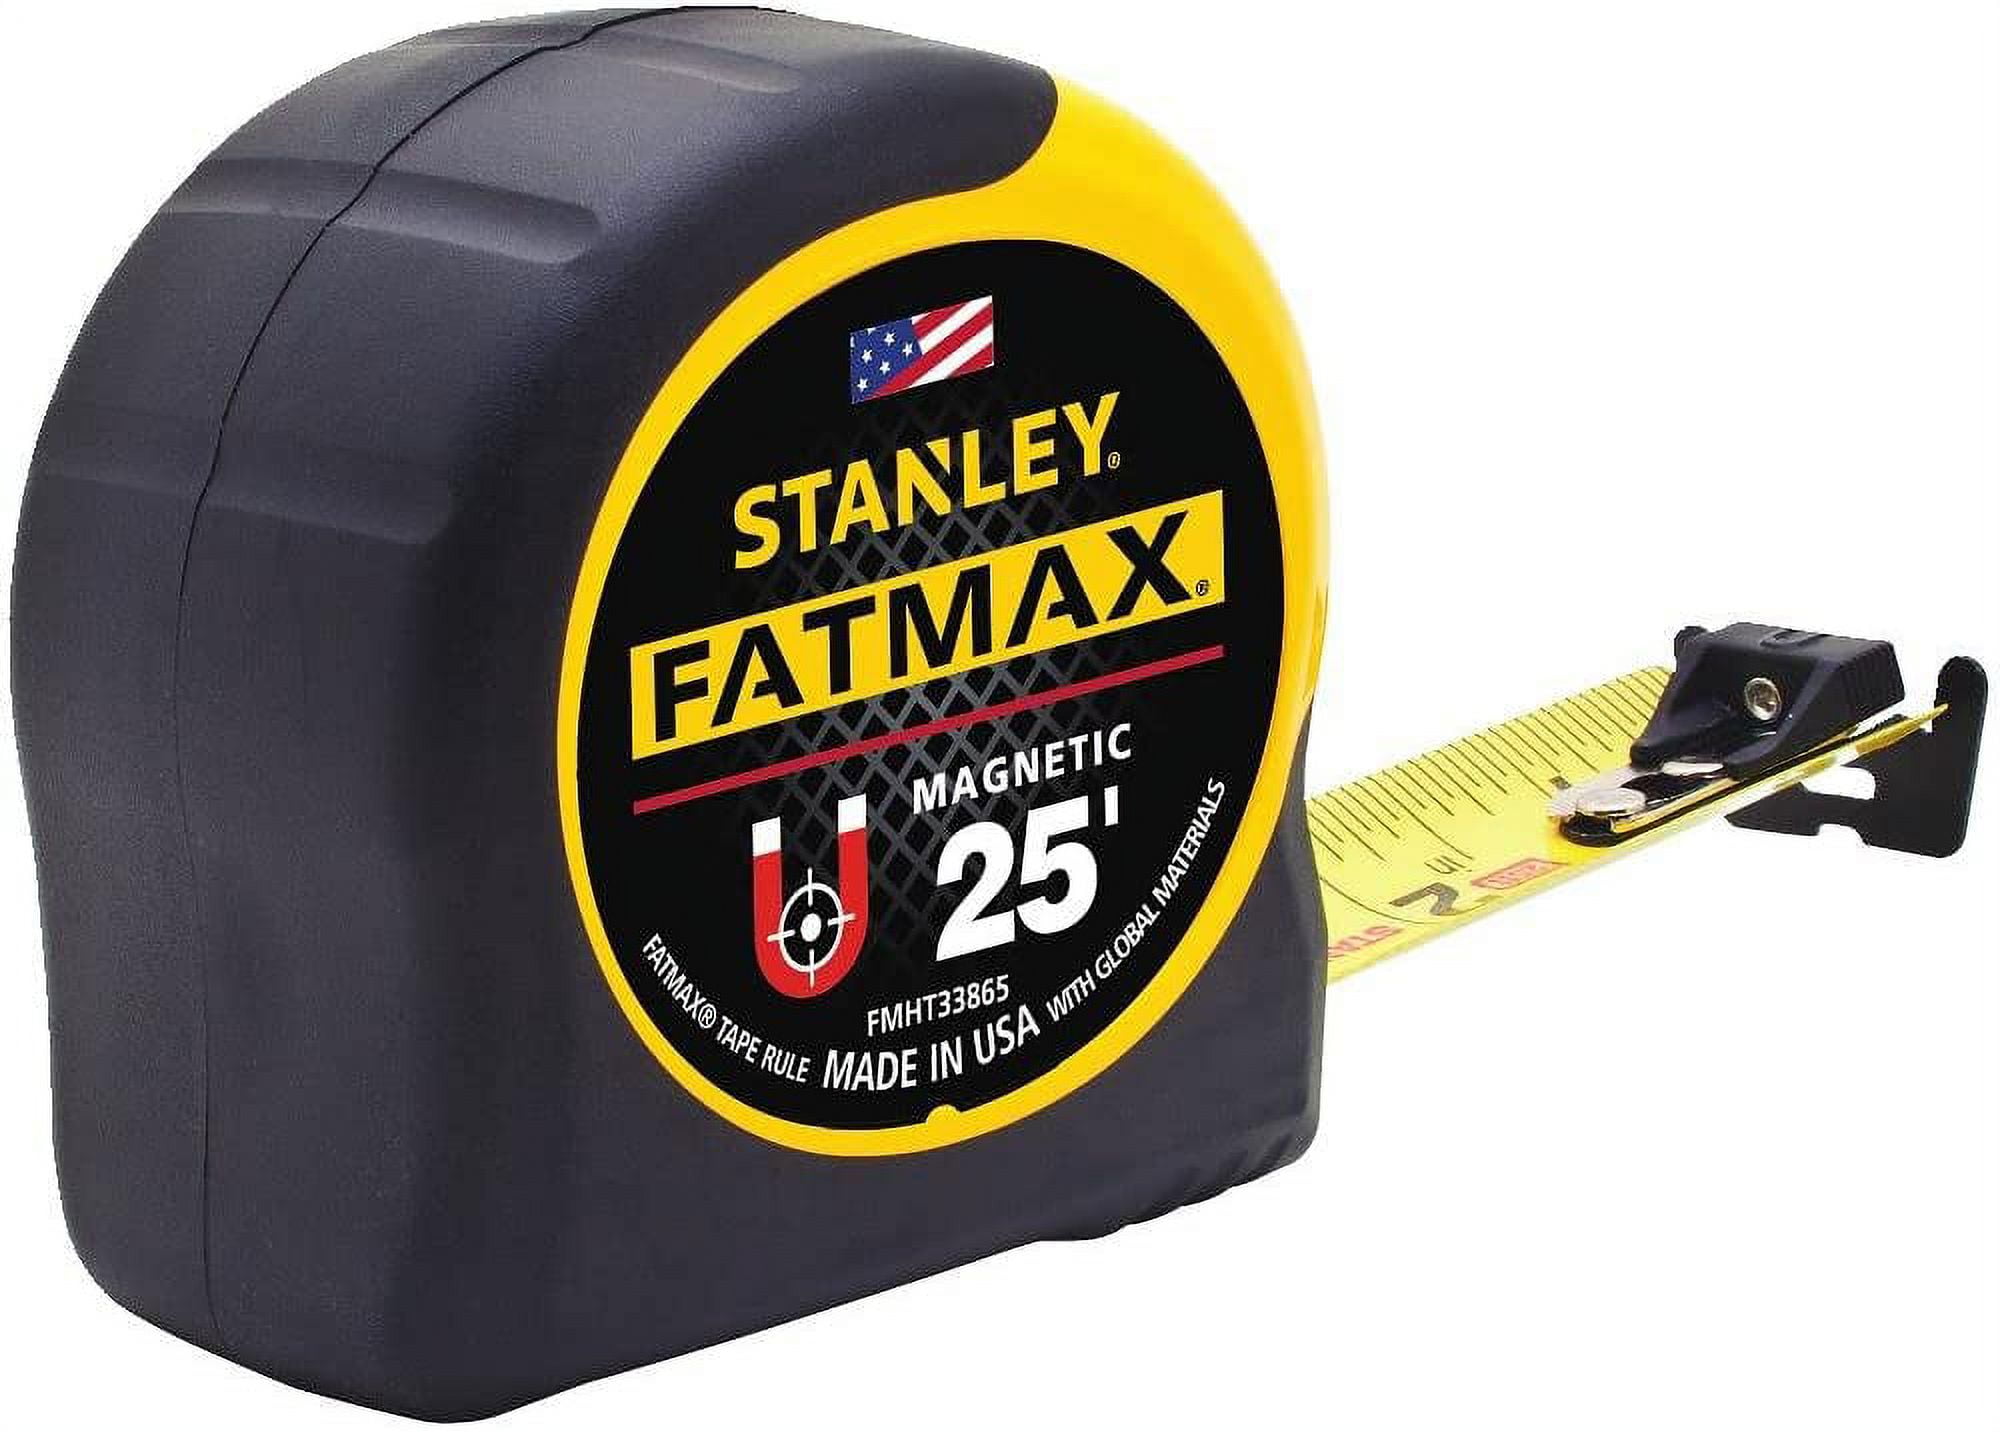 DURATECH 25FT Magnetic Tape Measure w/Fractions 1/8 Retractable